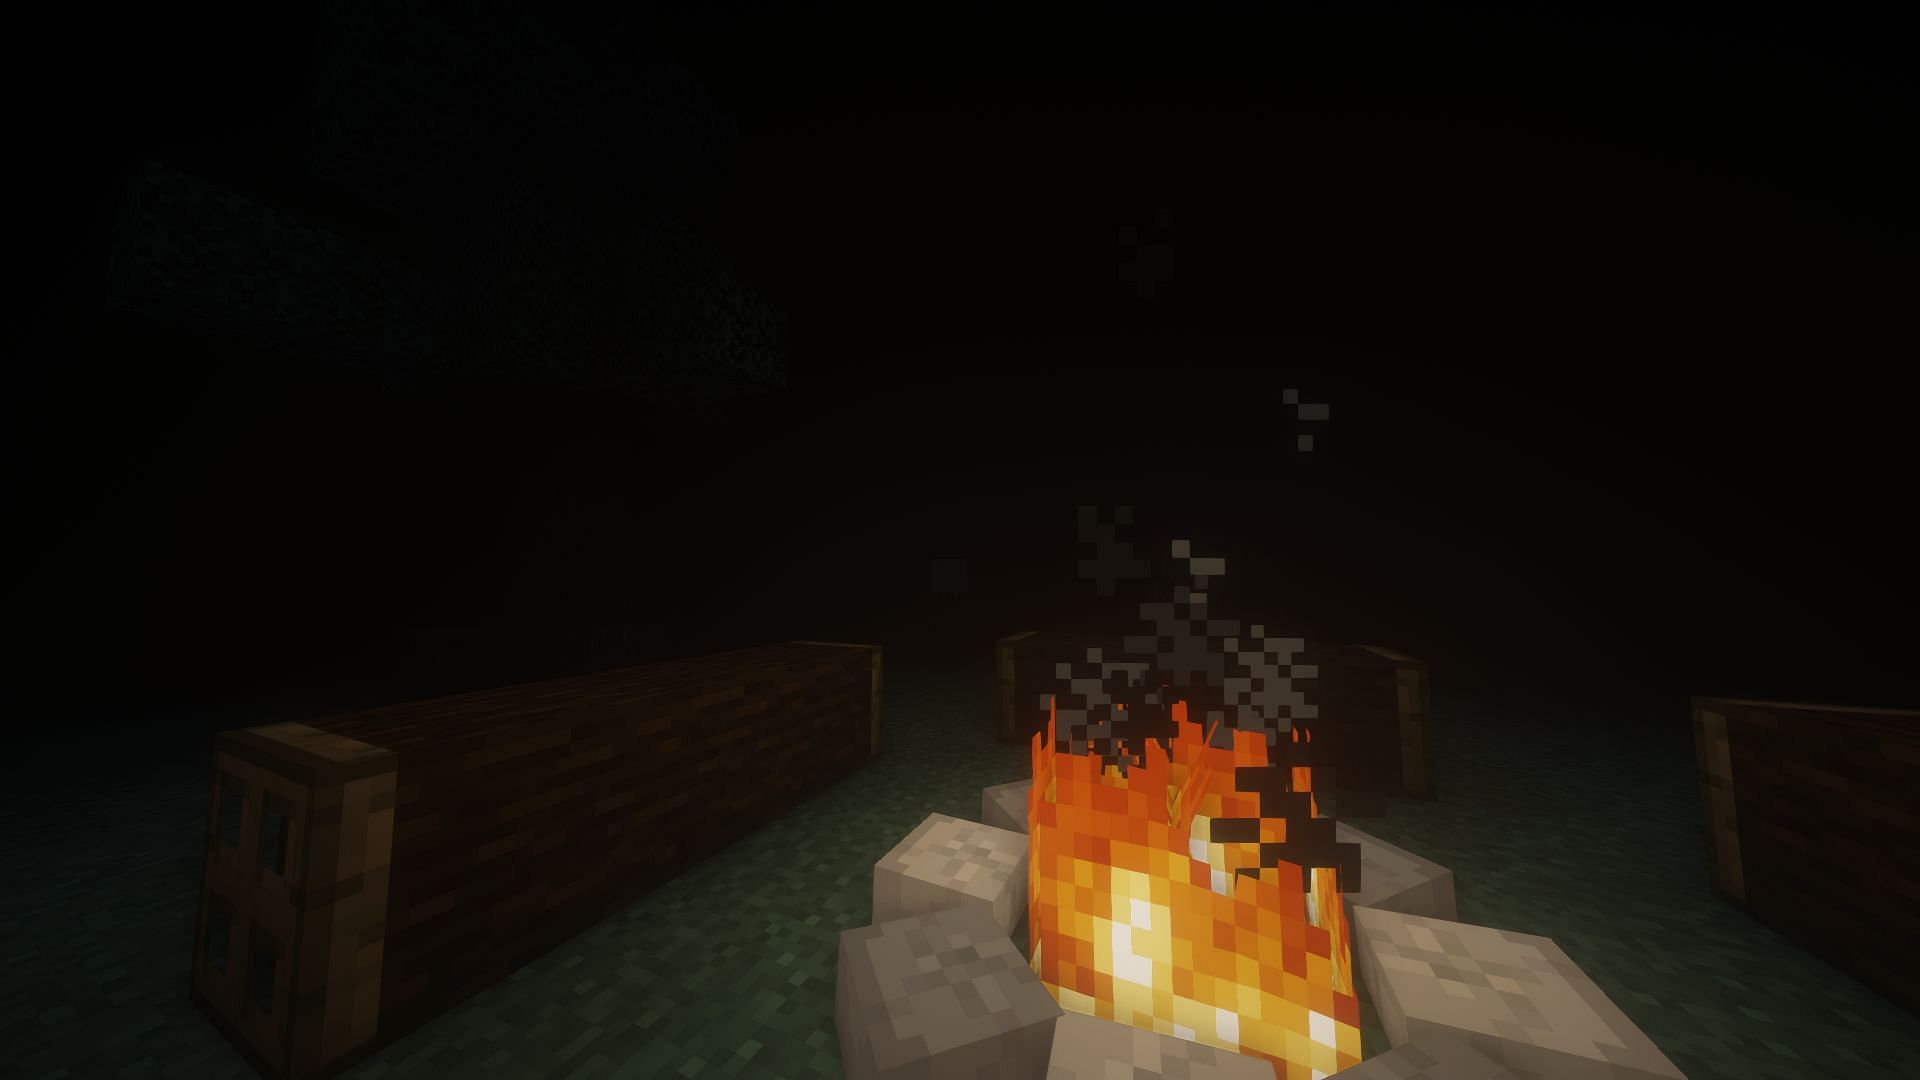 This custom map is inspired by the Slender: The Eight Pages game (Image via MinecraftMaps)